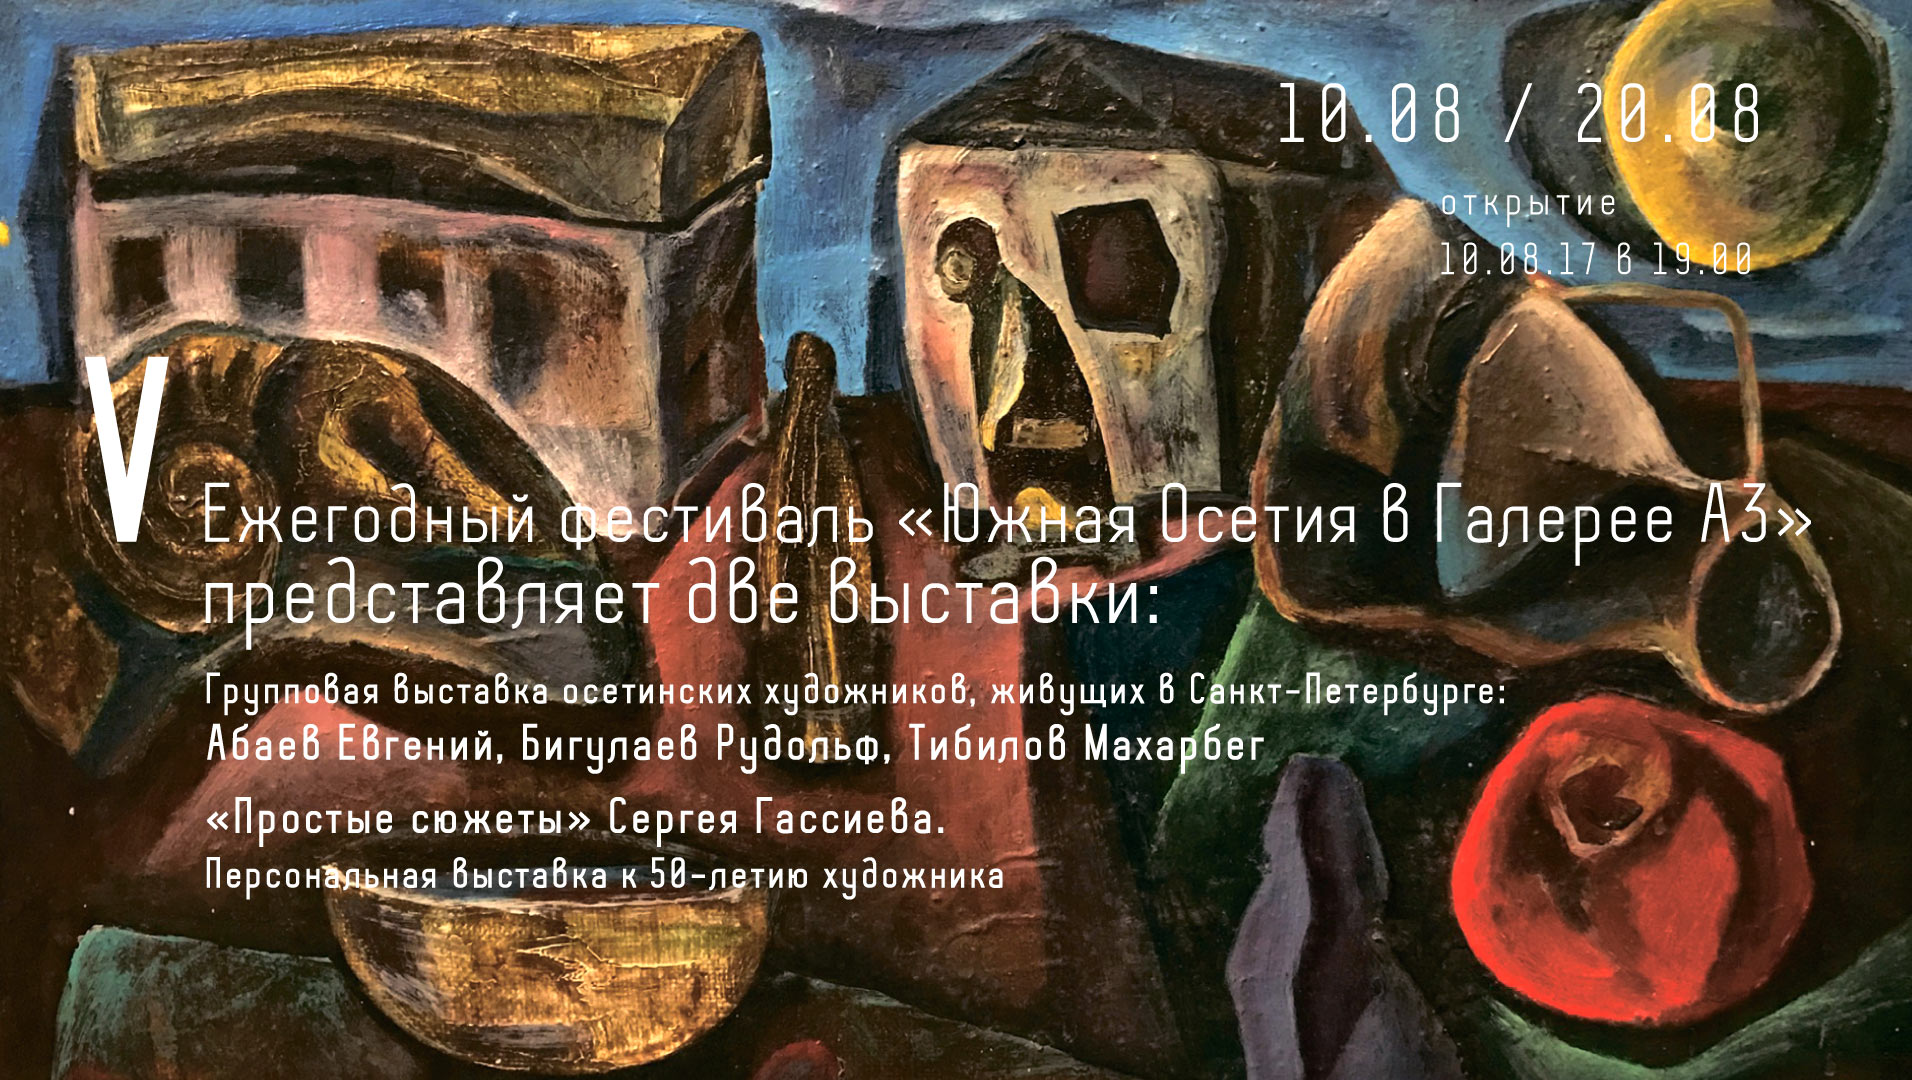 V annual festival “South Ossetia in Gallery A3”